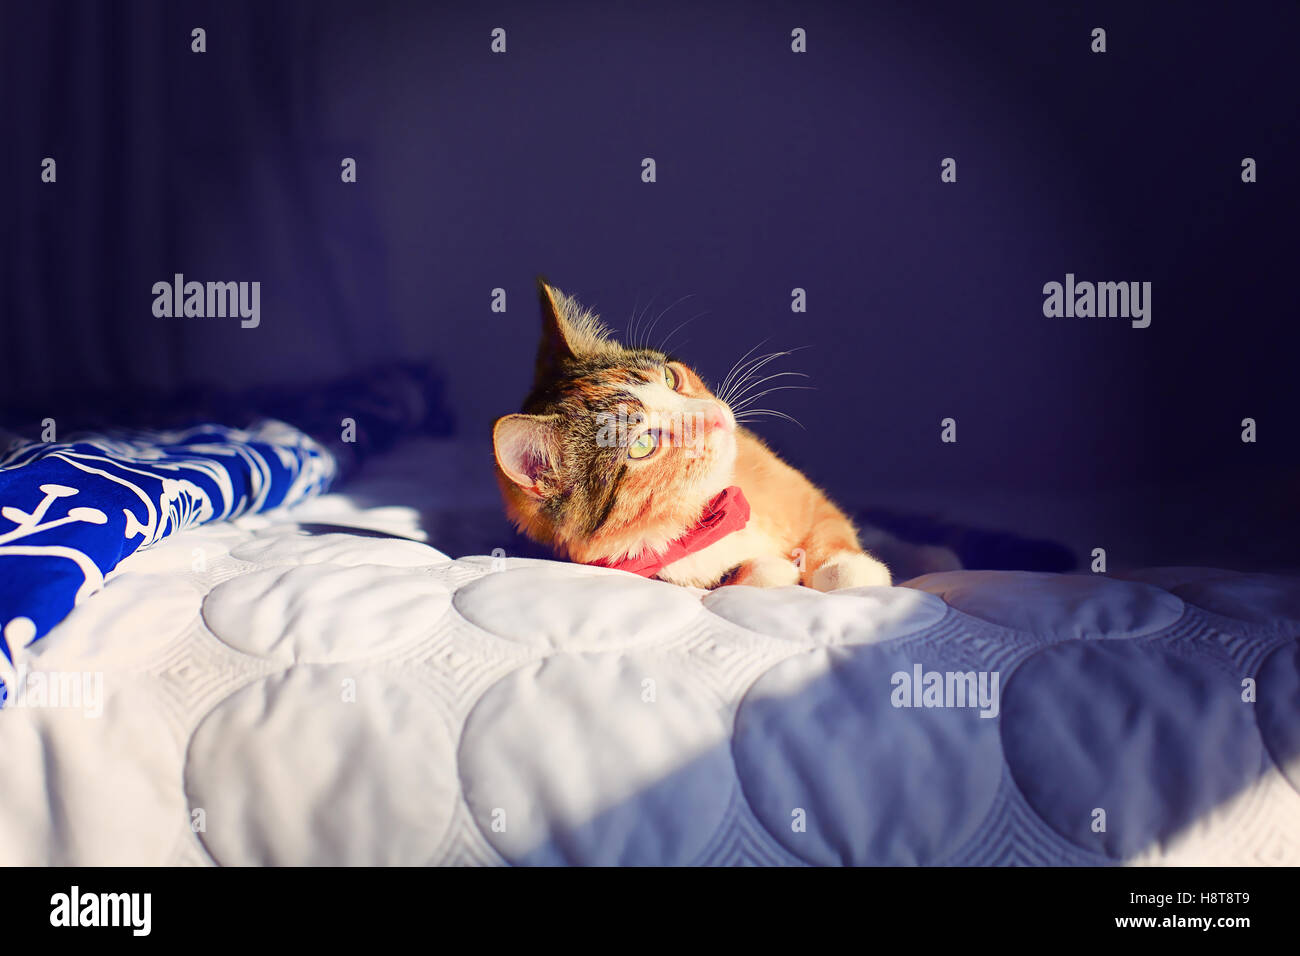 A orange, black and white speckled housecat wearing a red bowtie rests on a bed in dramatic light. Stock Photo